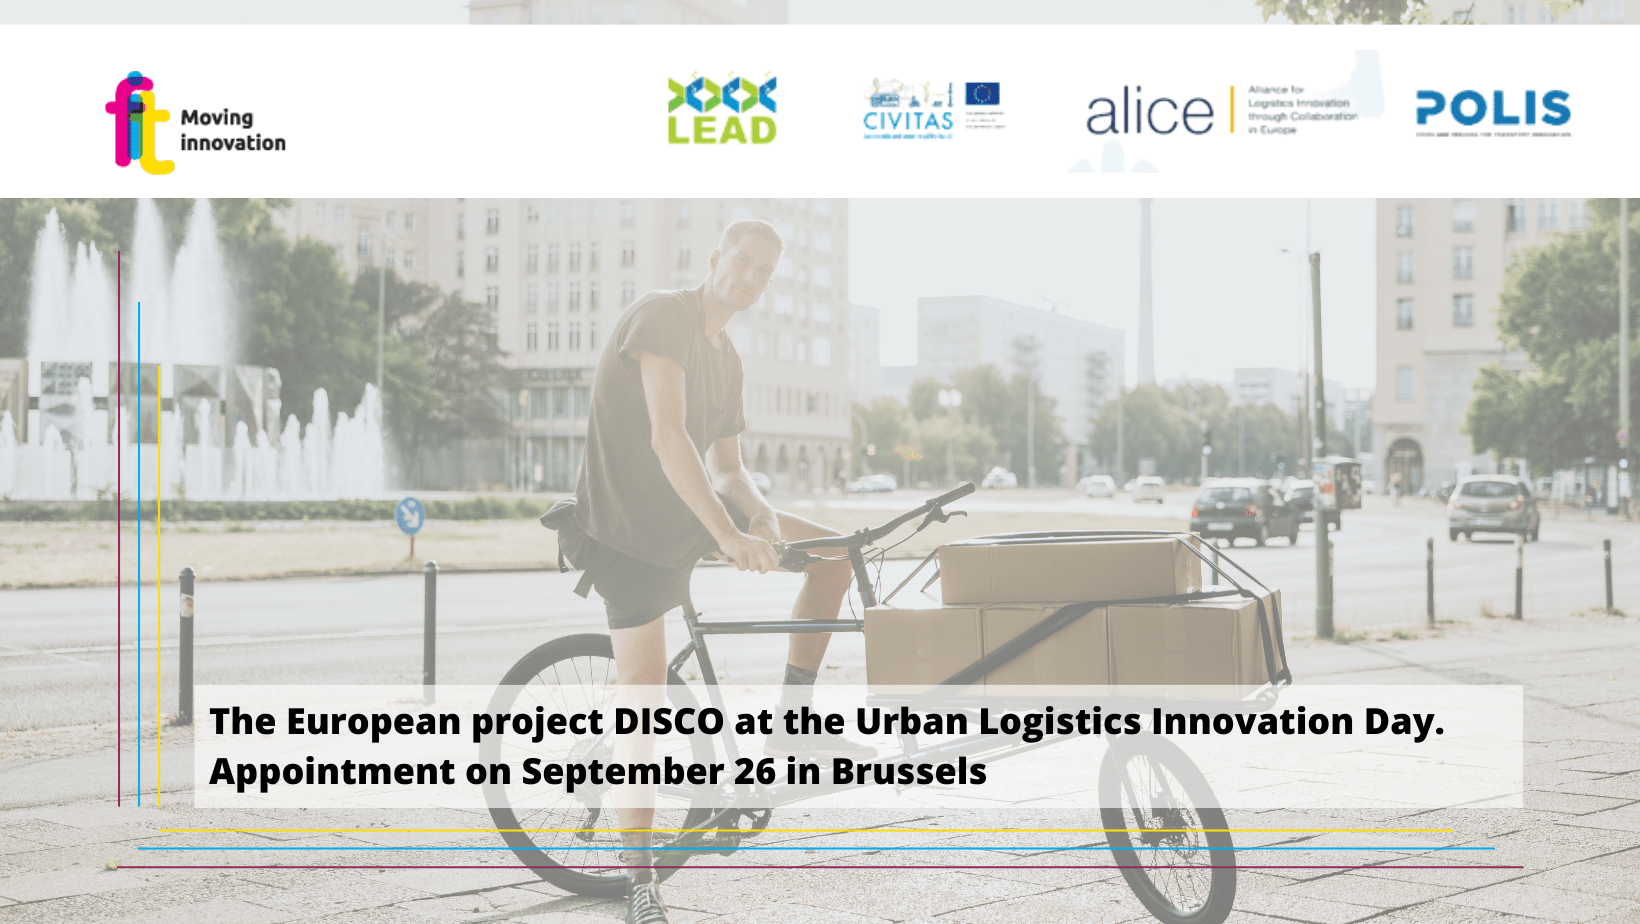 The European project DISCO at the Urban Logistics Innovation Day